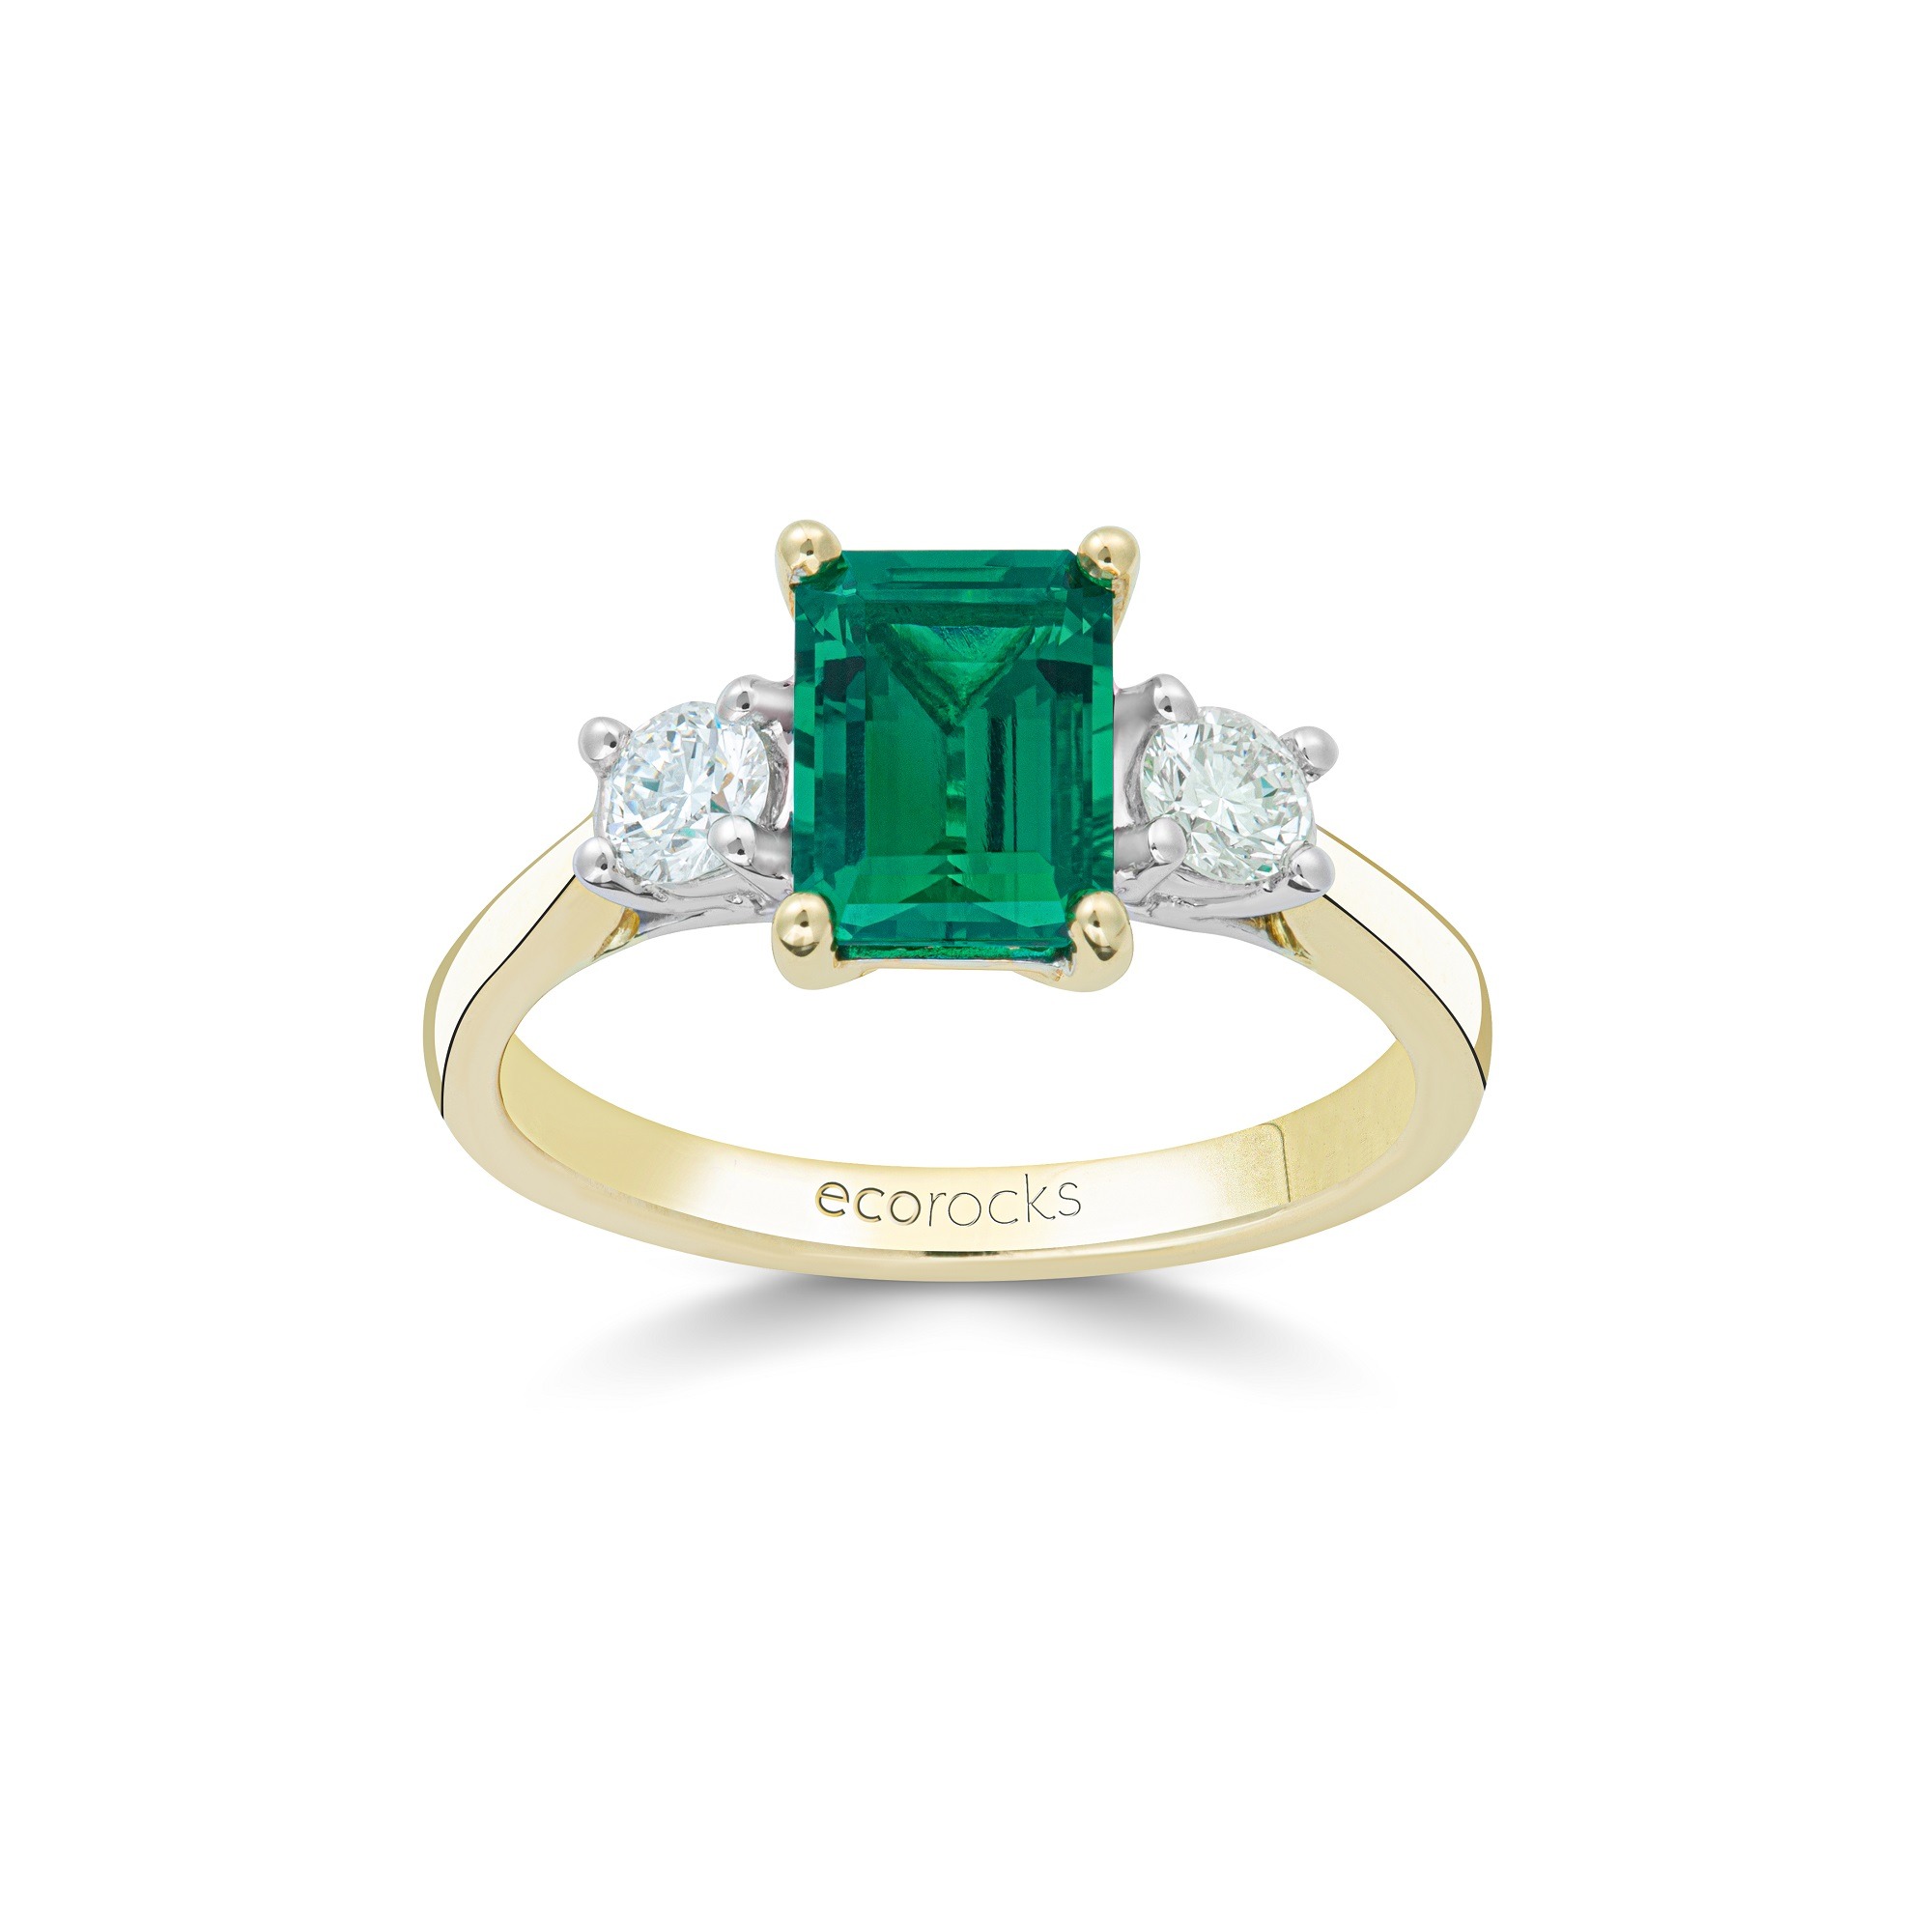 Colour Editions Emerald-Cut Synthetic Emerald and Laboratory-Grown Diamond Trilogy Ring in 9ct Yellow Gold (1.38cts)